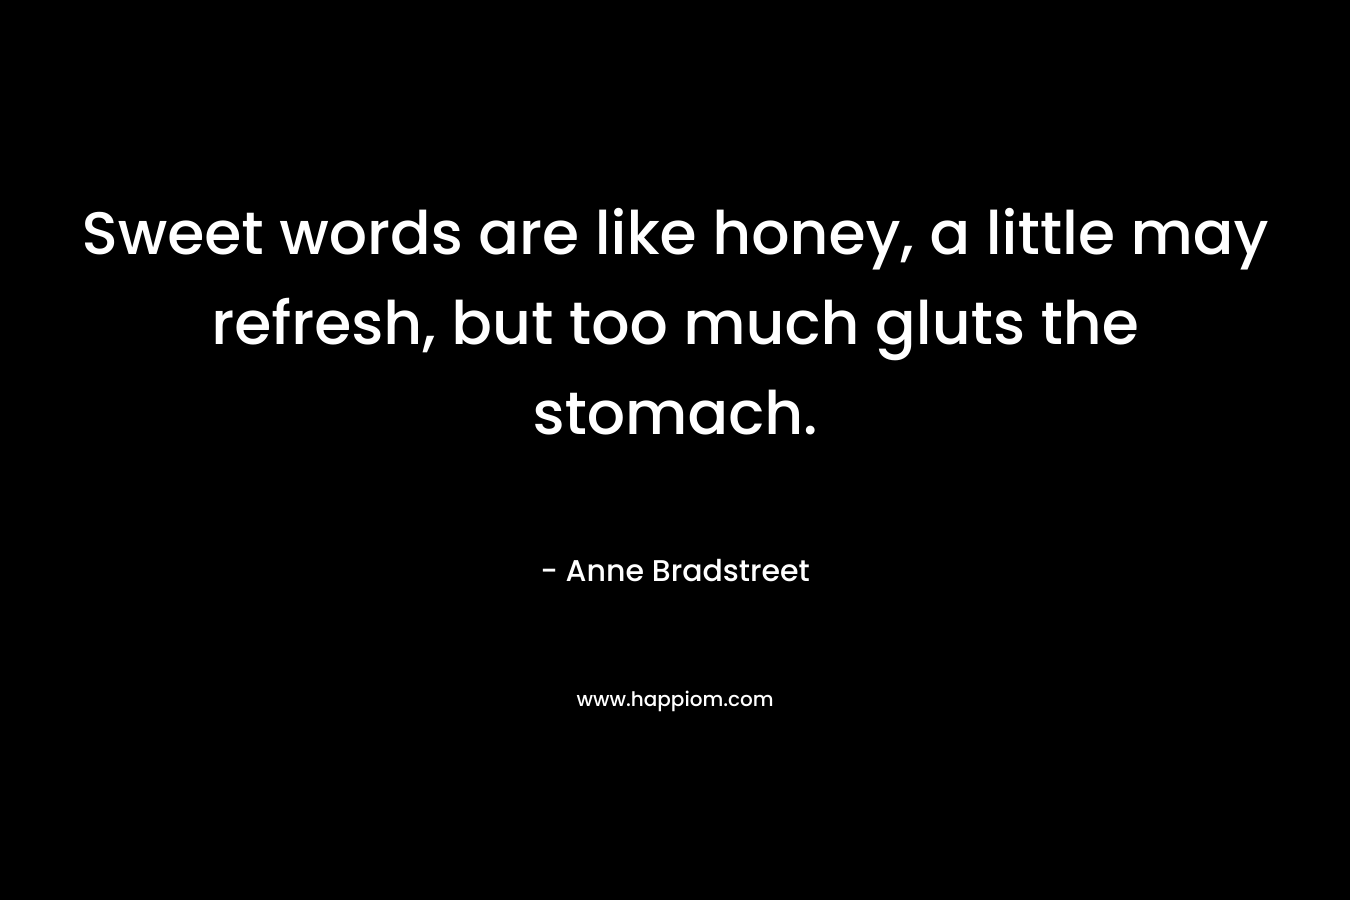 Sweet words are like honey, a little may refresh, but too much gluts the stomach. – Anne Bradstreet